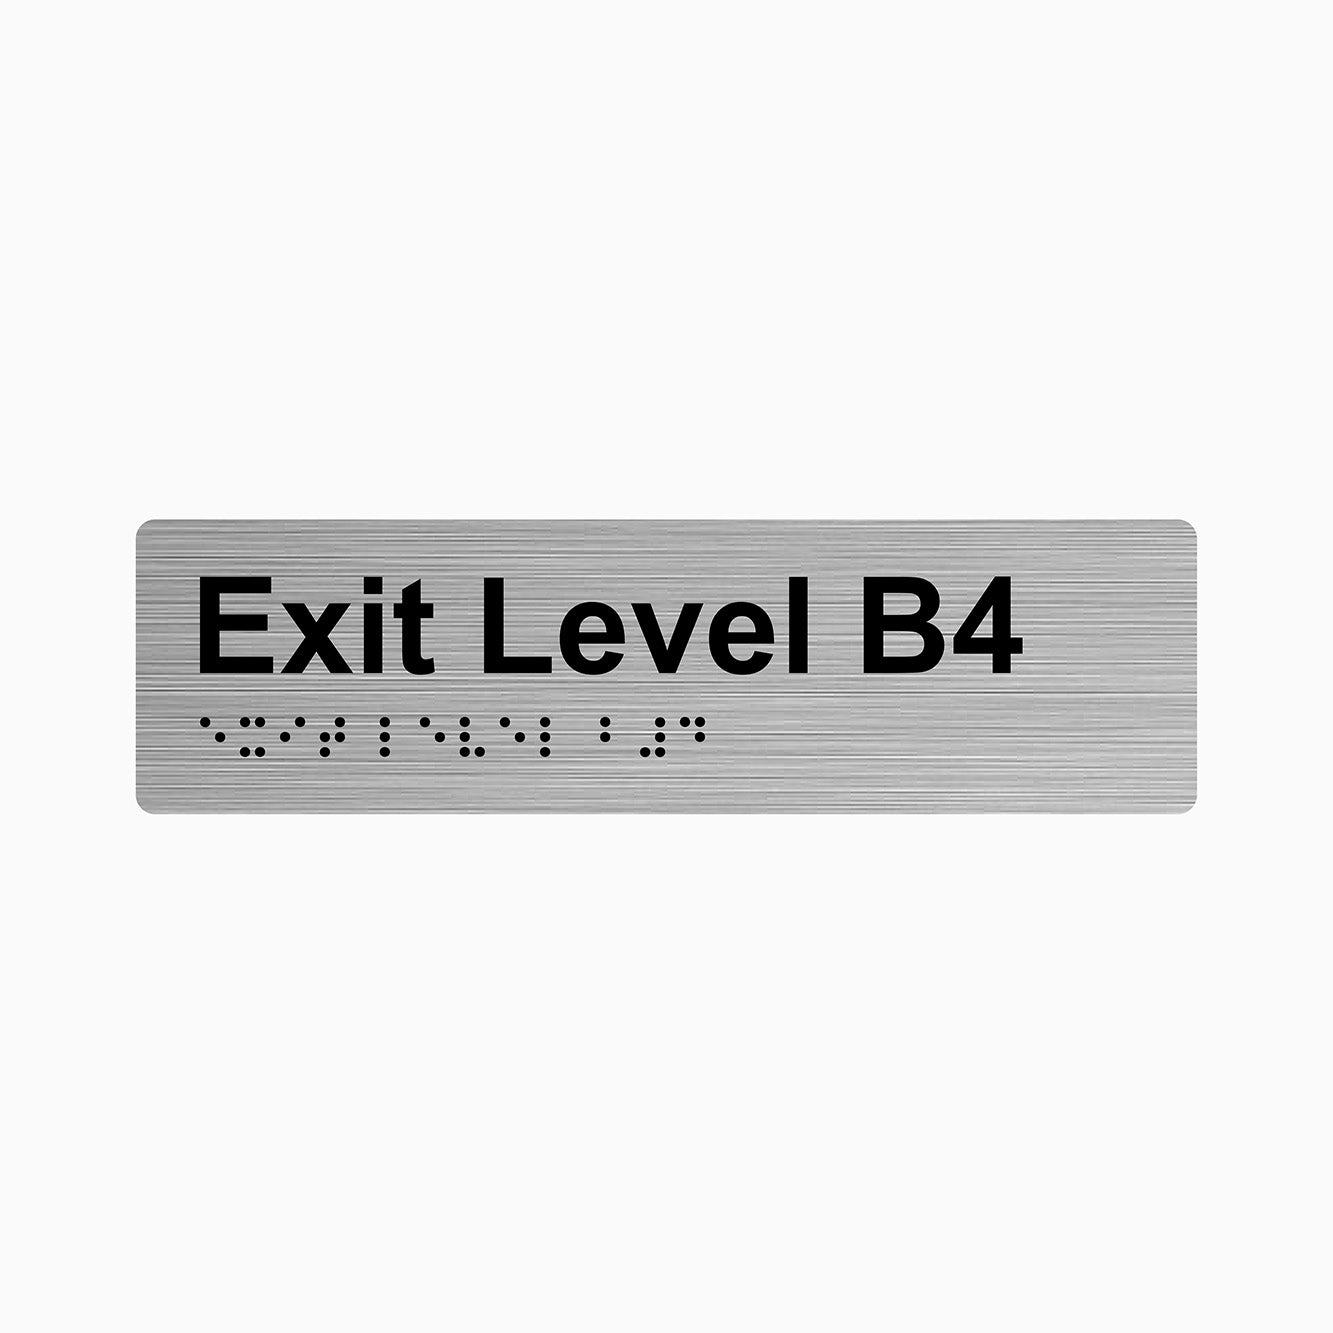 Exit Level Braille &Tactile Signs